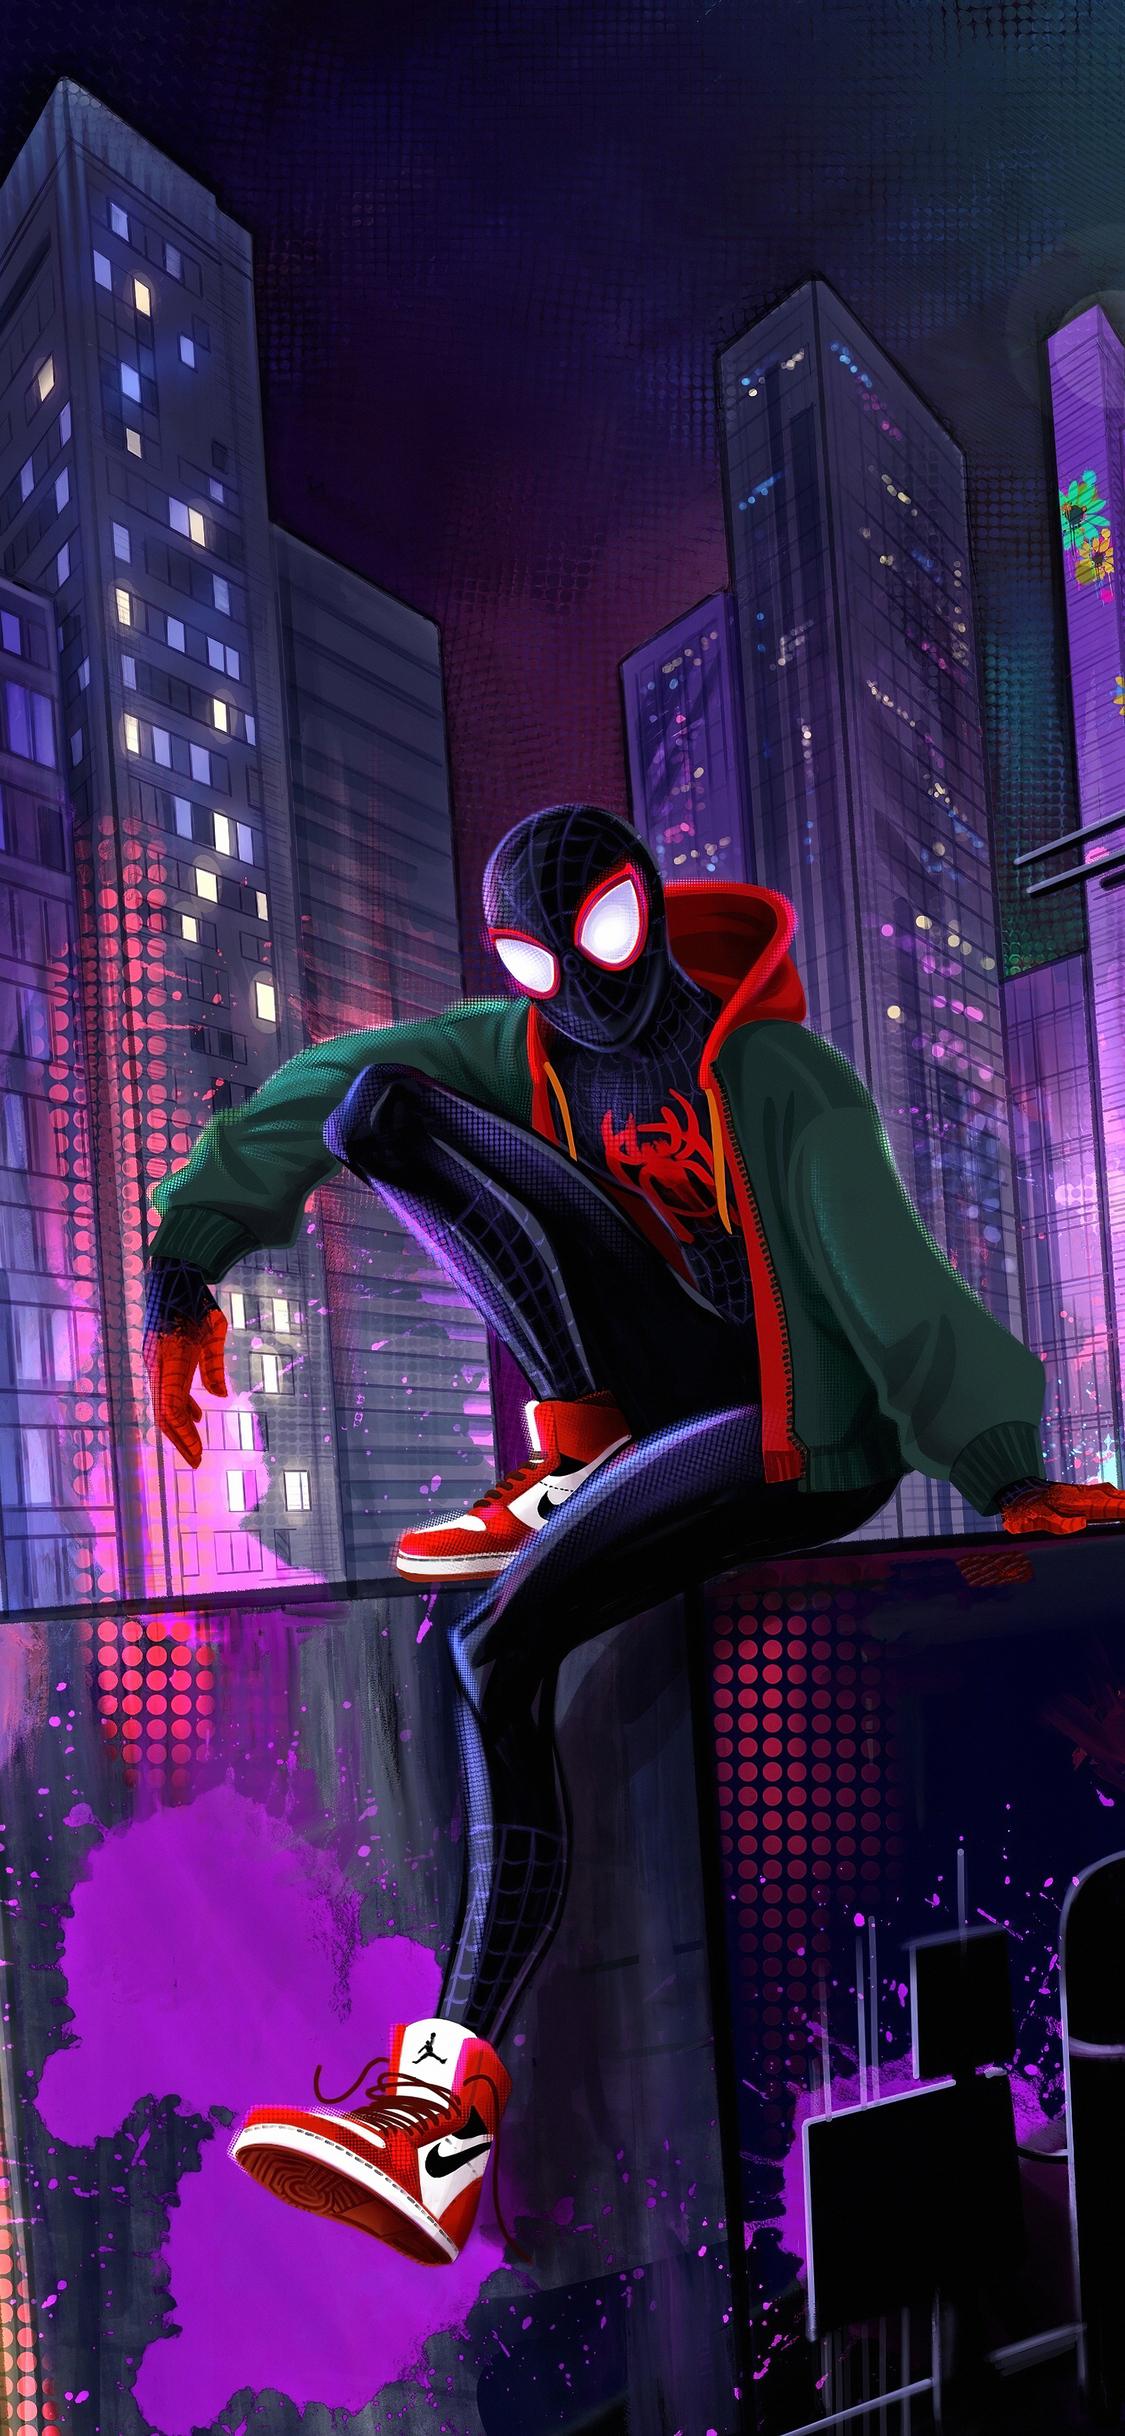 Download wallpaper 1280x2120 black and red suit spiderman video game  iphone 6 plus 1280x2120 hd background 16142